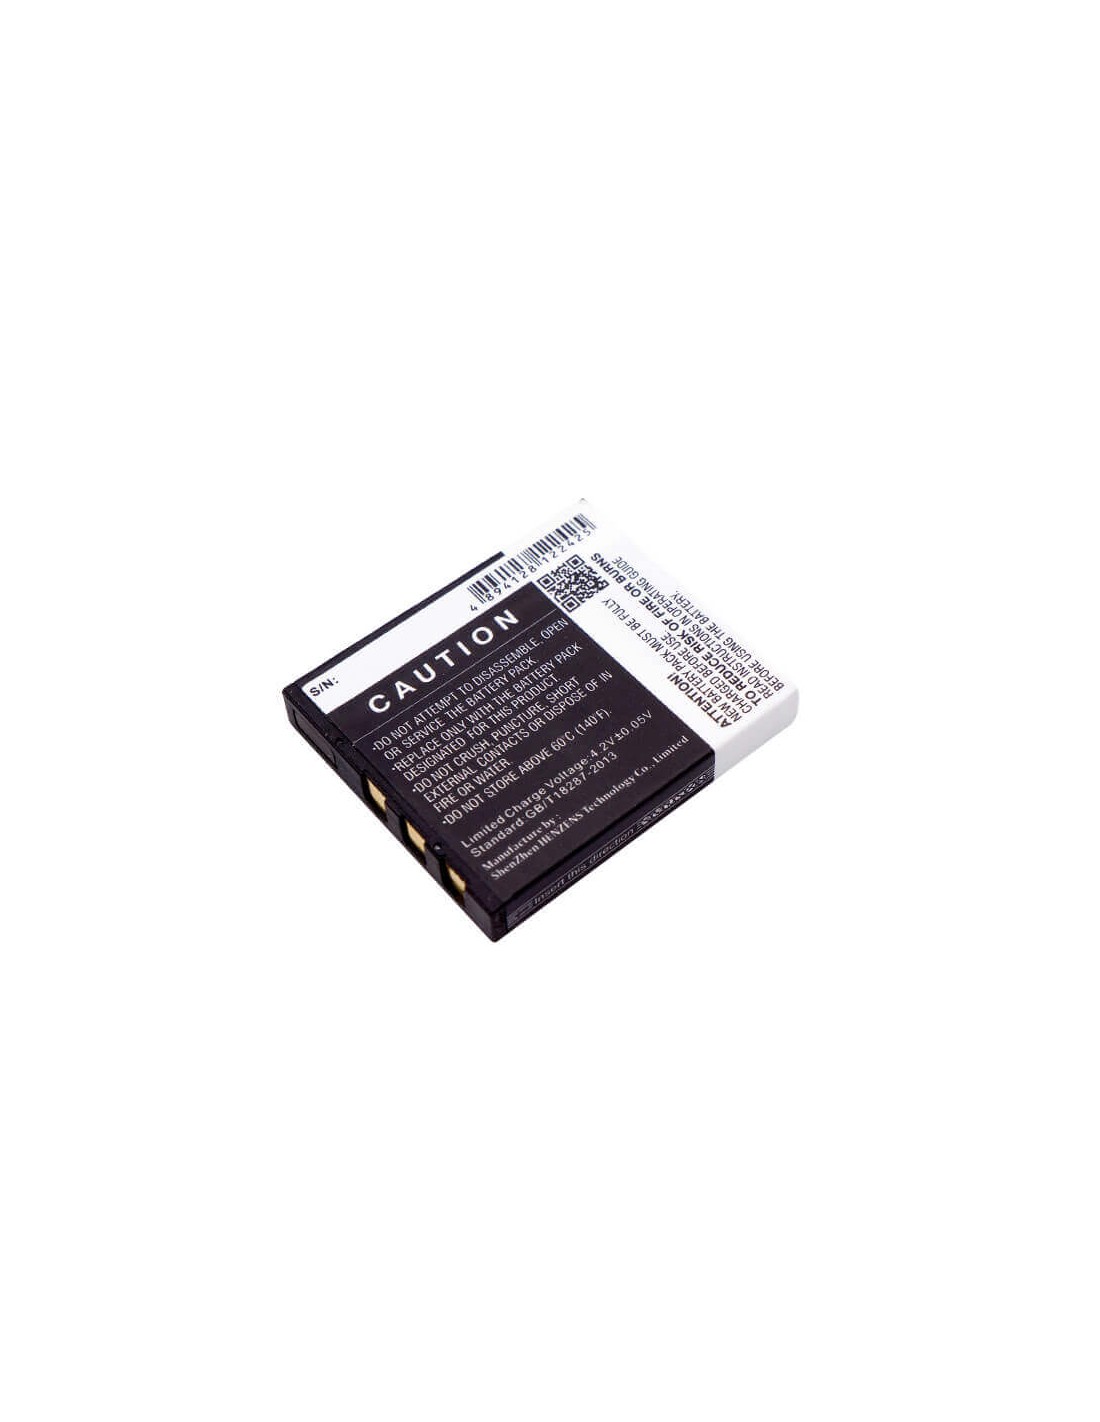 Battery for Lxe, 8650 Bluetooth Ring Scanners, Bluetooth Ring Scanner, L 3.7V, 850mAh - 3.15Wh